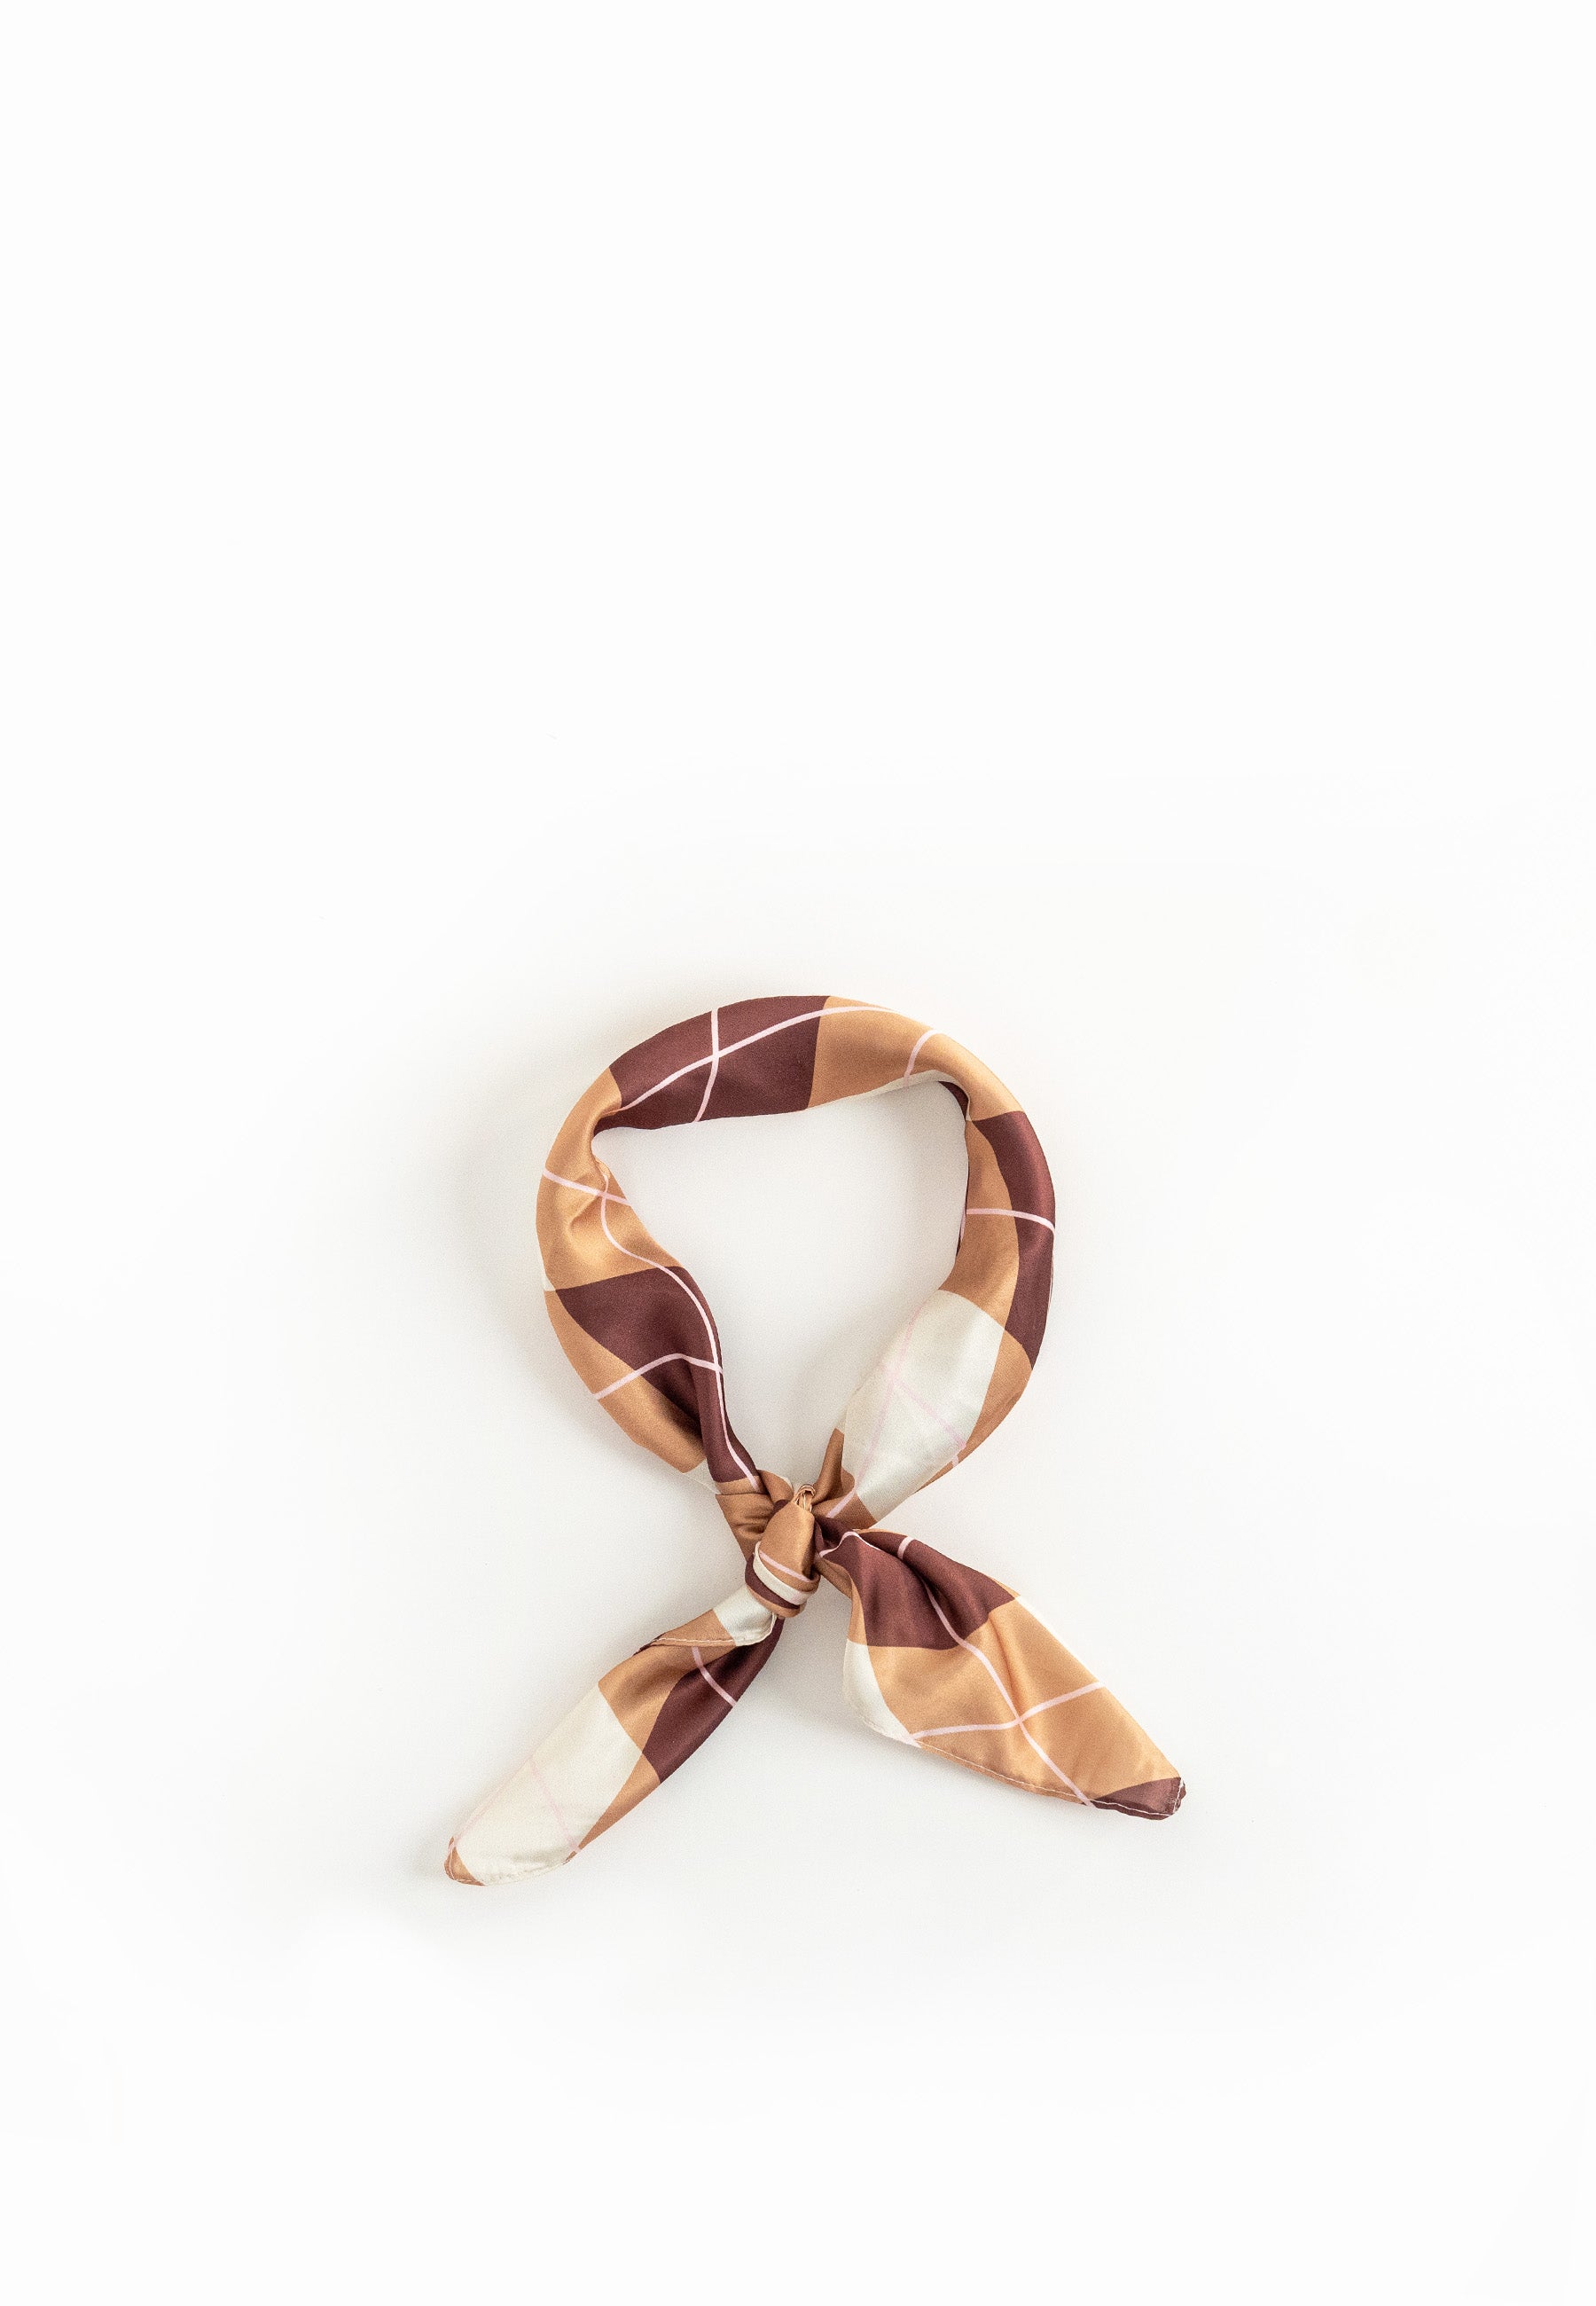 Multiway Headscarf in Brown Argyle Print | Bandana | Check | Neck Tie | Top | Festival | Party | Summer | Holiday | Beach | Women's Accessories | Accessory 